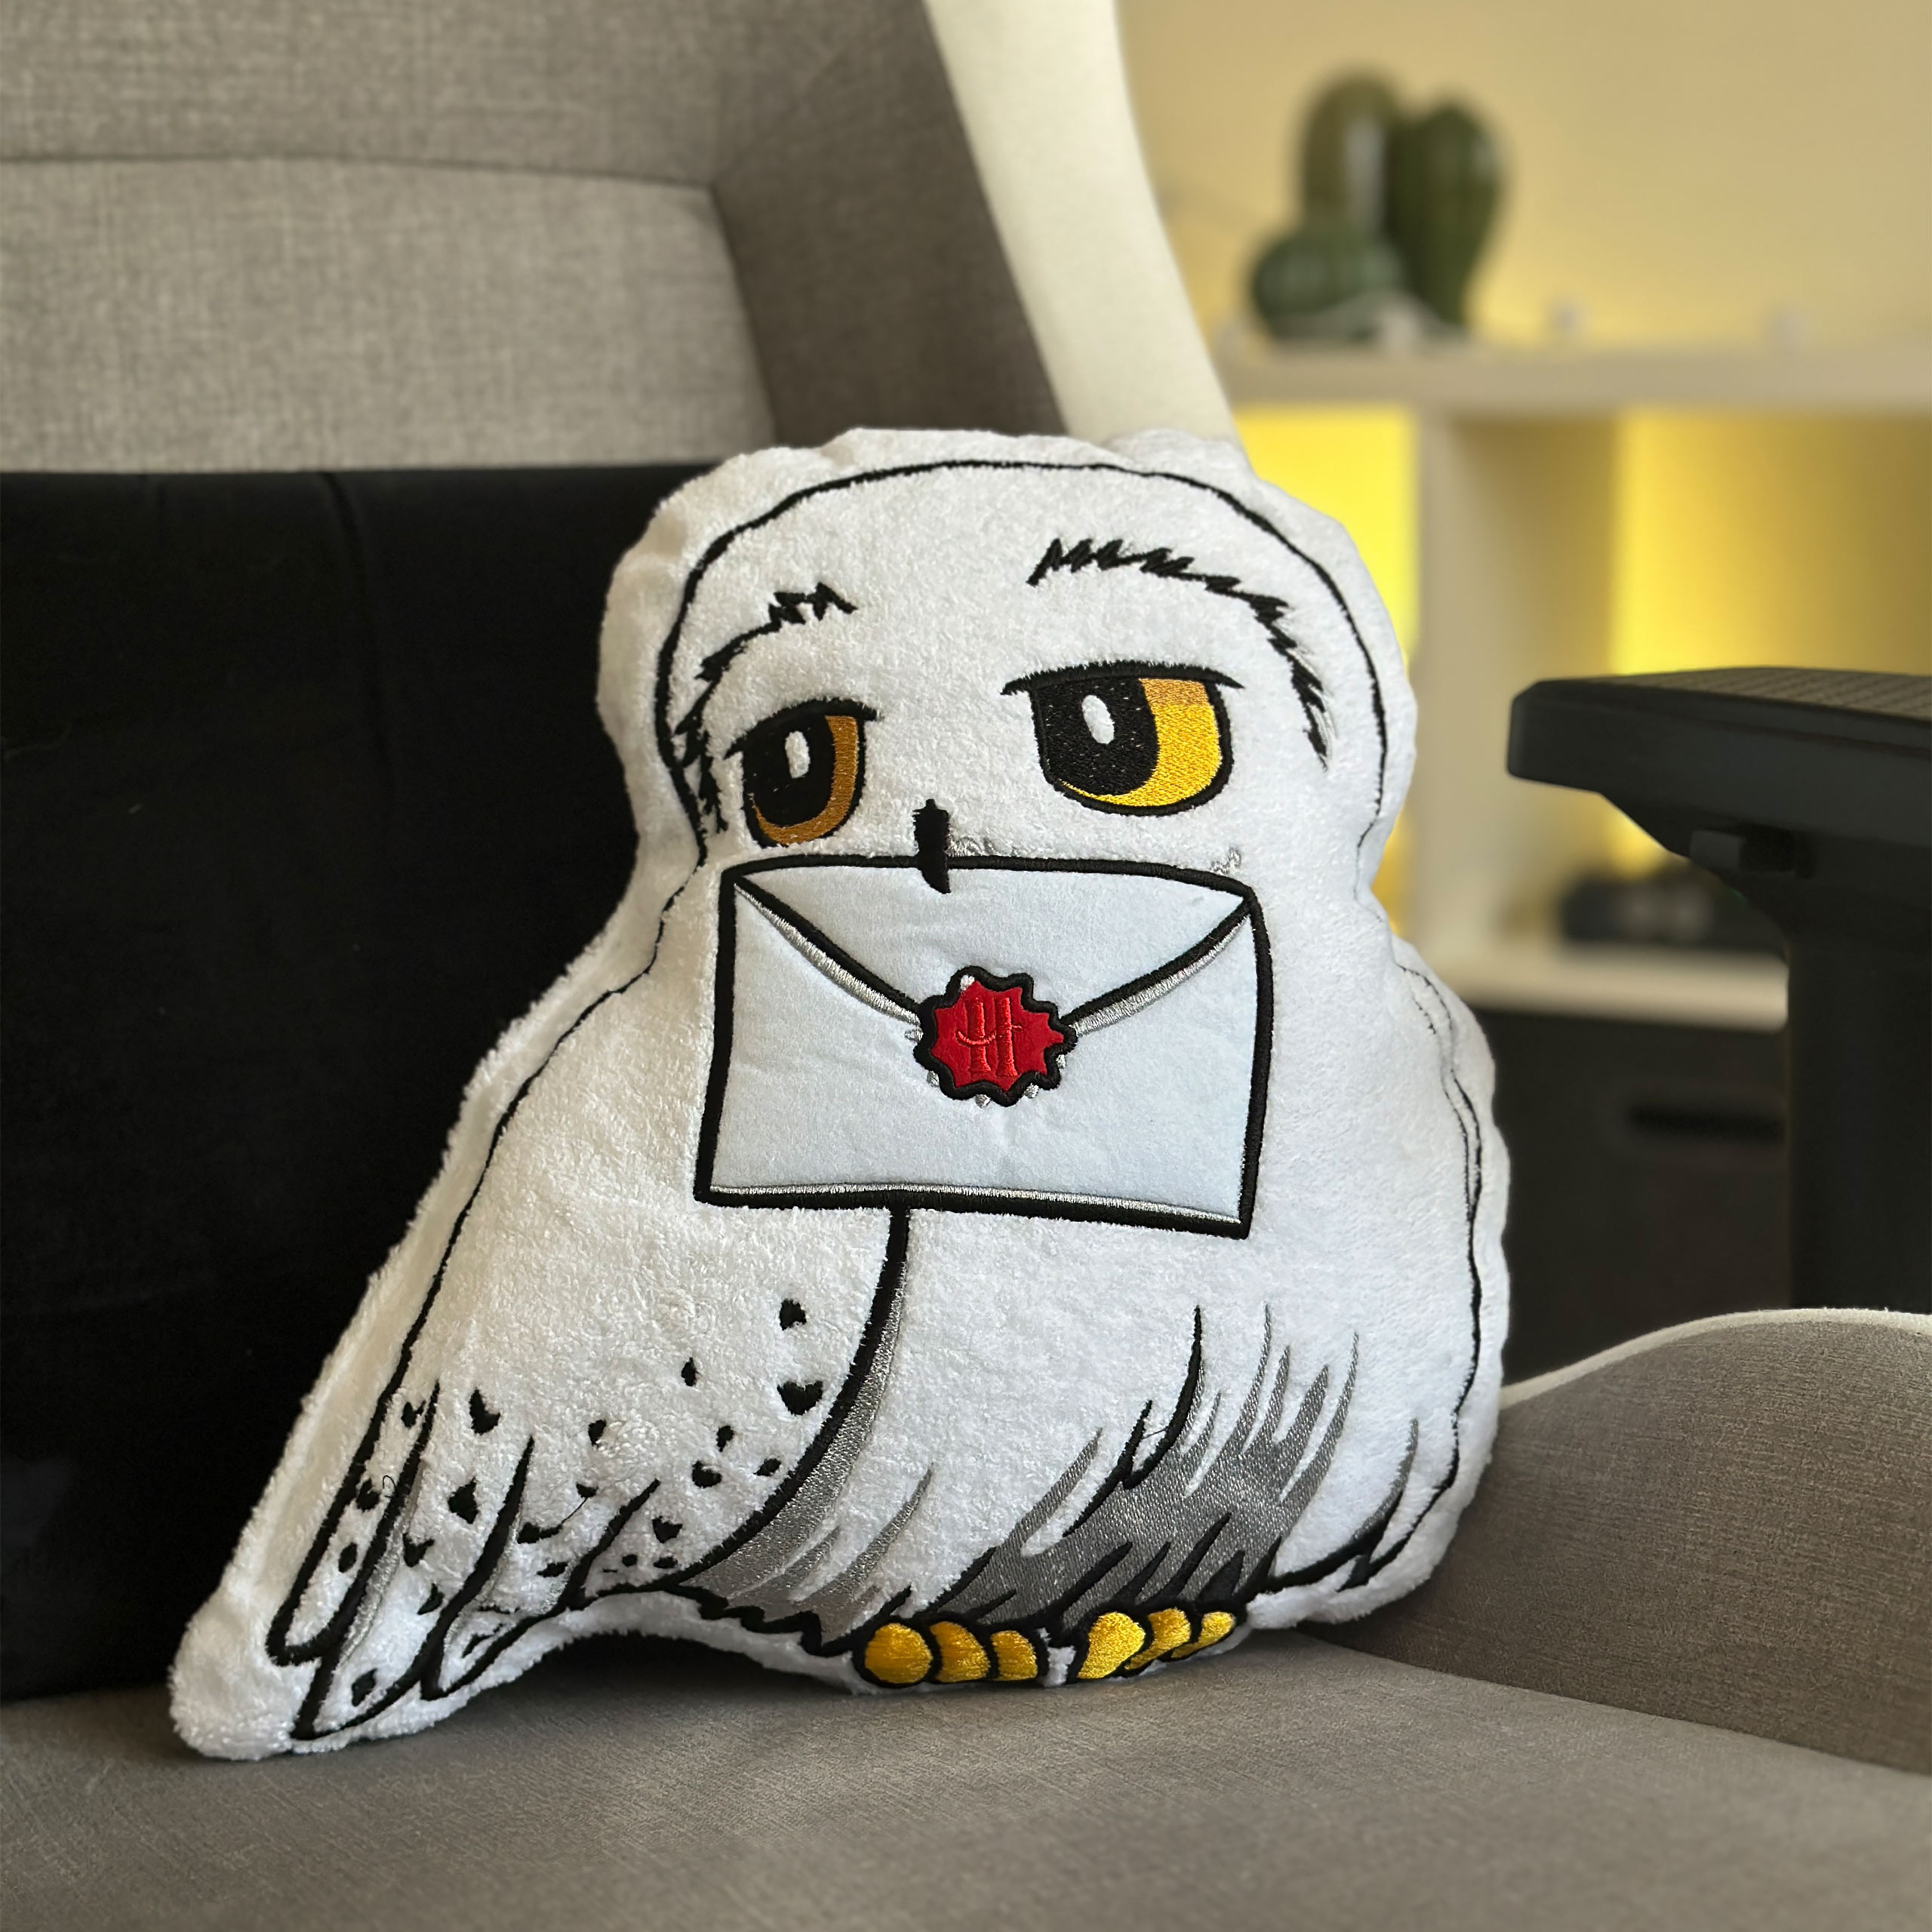 Hedwig Pillow - Harry Potter